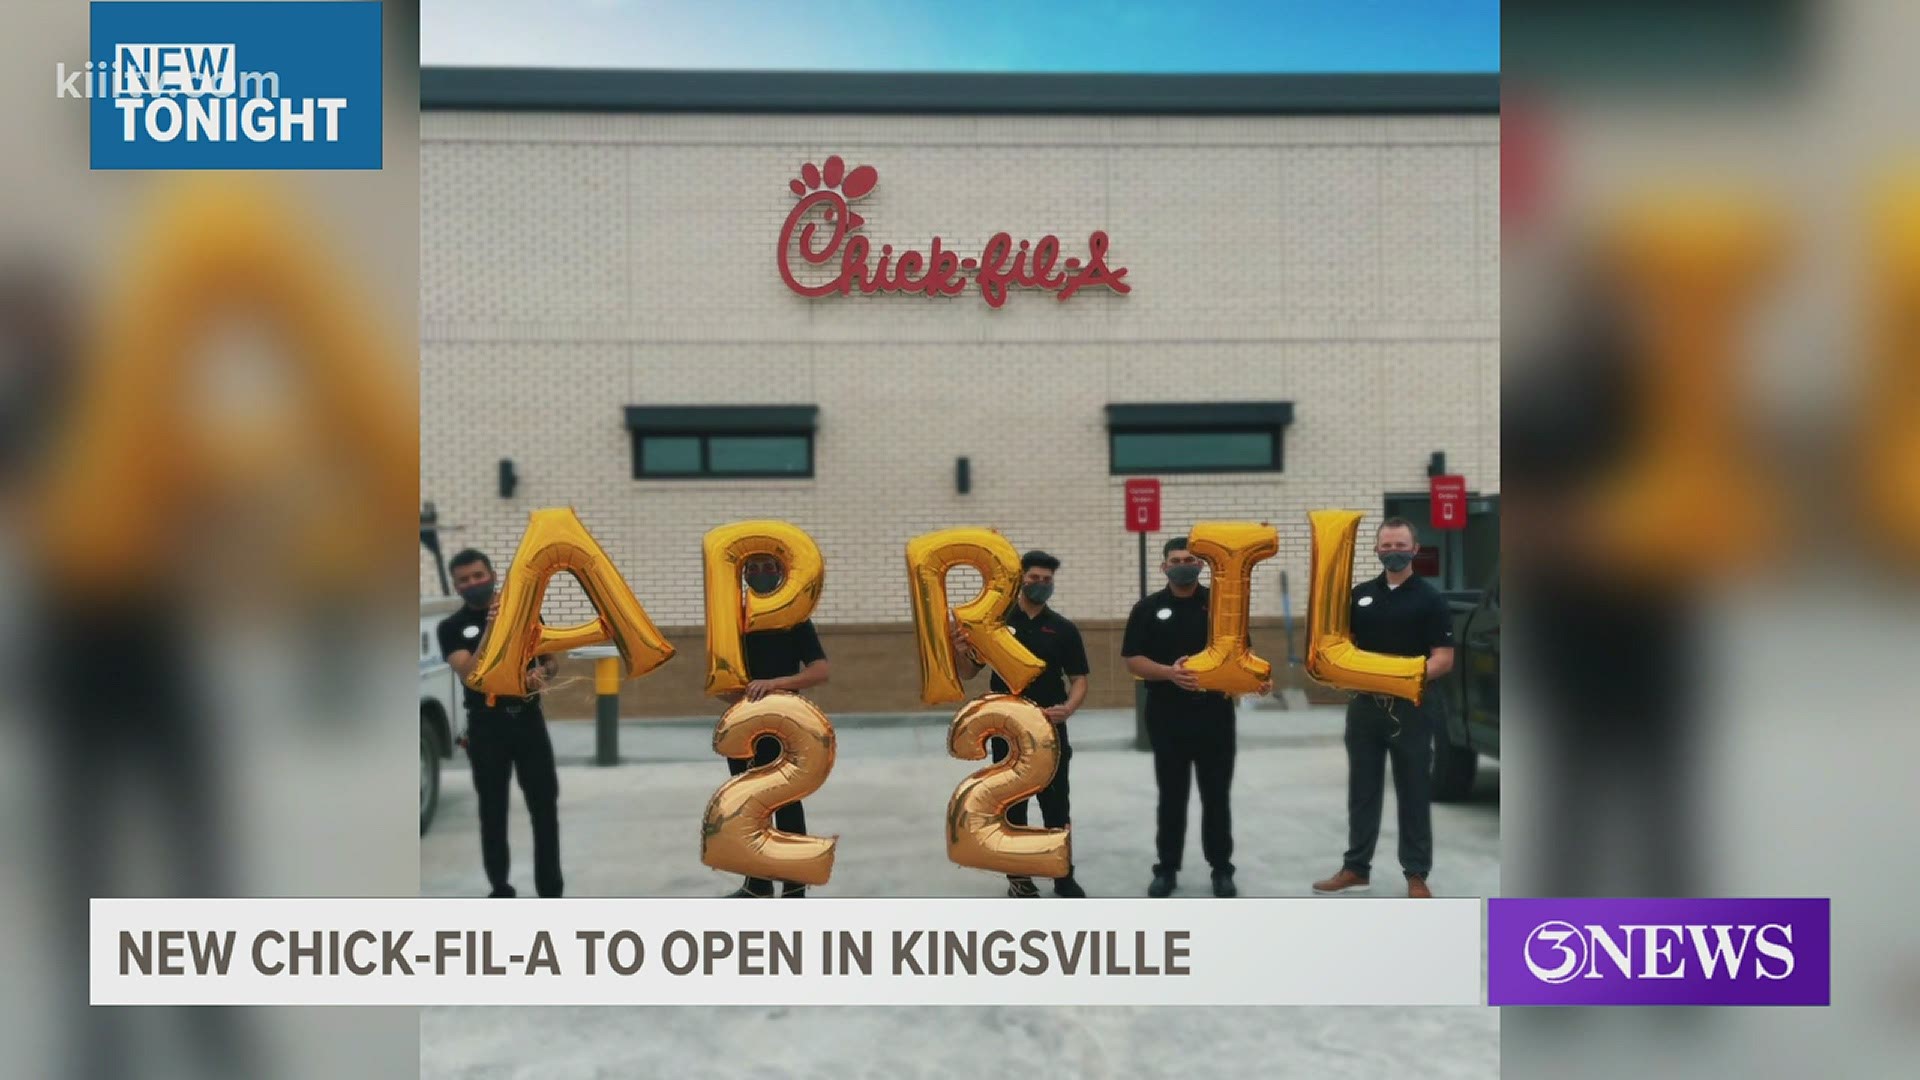 To celebrate the Grand Opening, Chick-fil-A Kingsville will be surprising 100 local heroes making an impact in the community with free Chick-fil-A for a year.